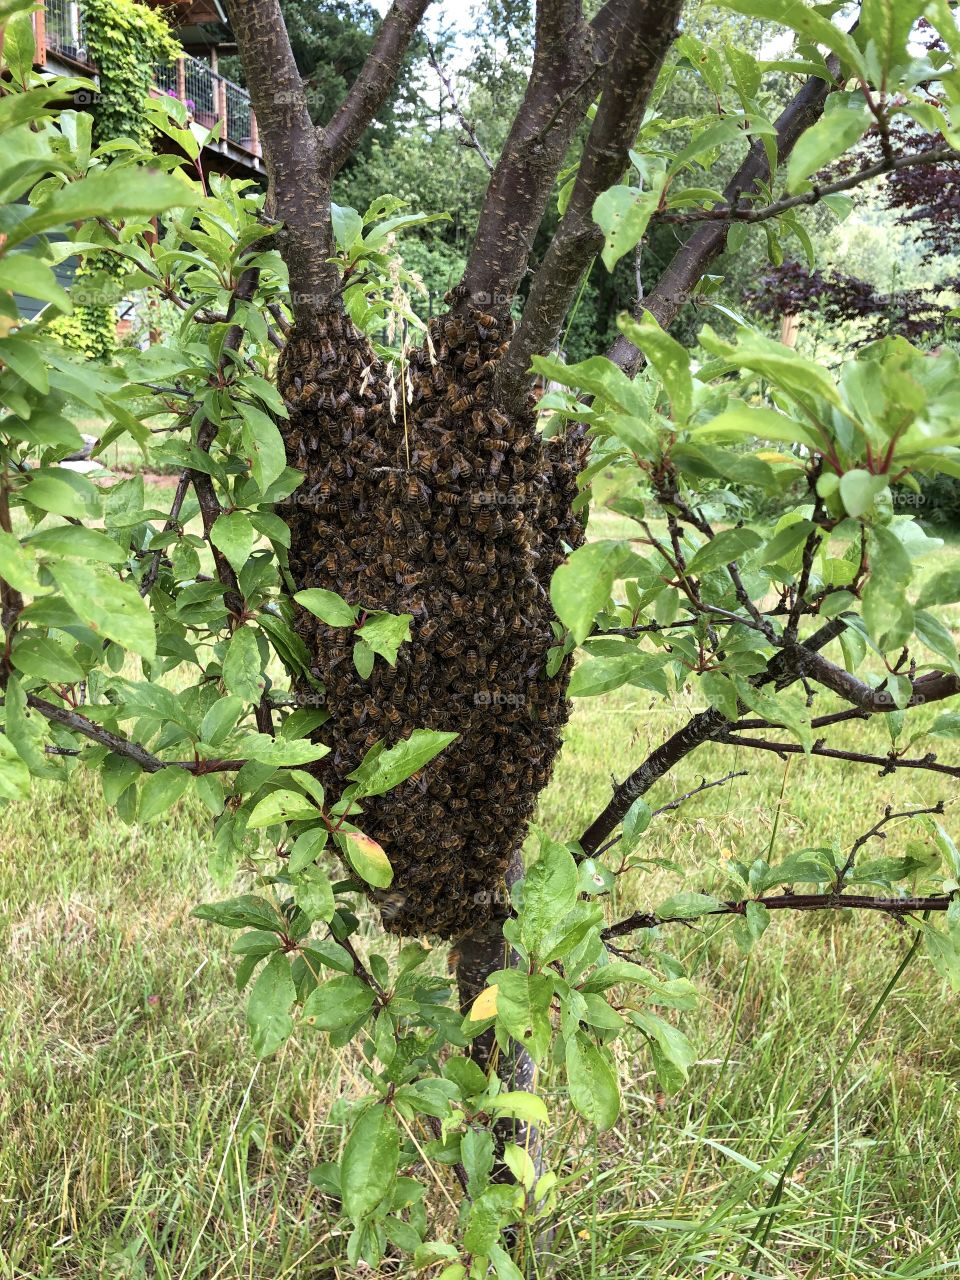 A swarm of bees on a plum tree